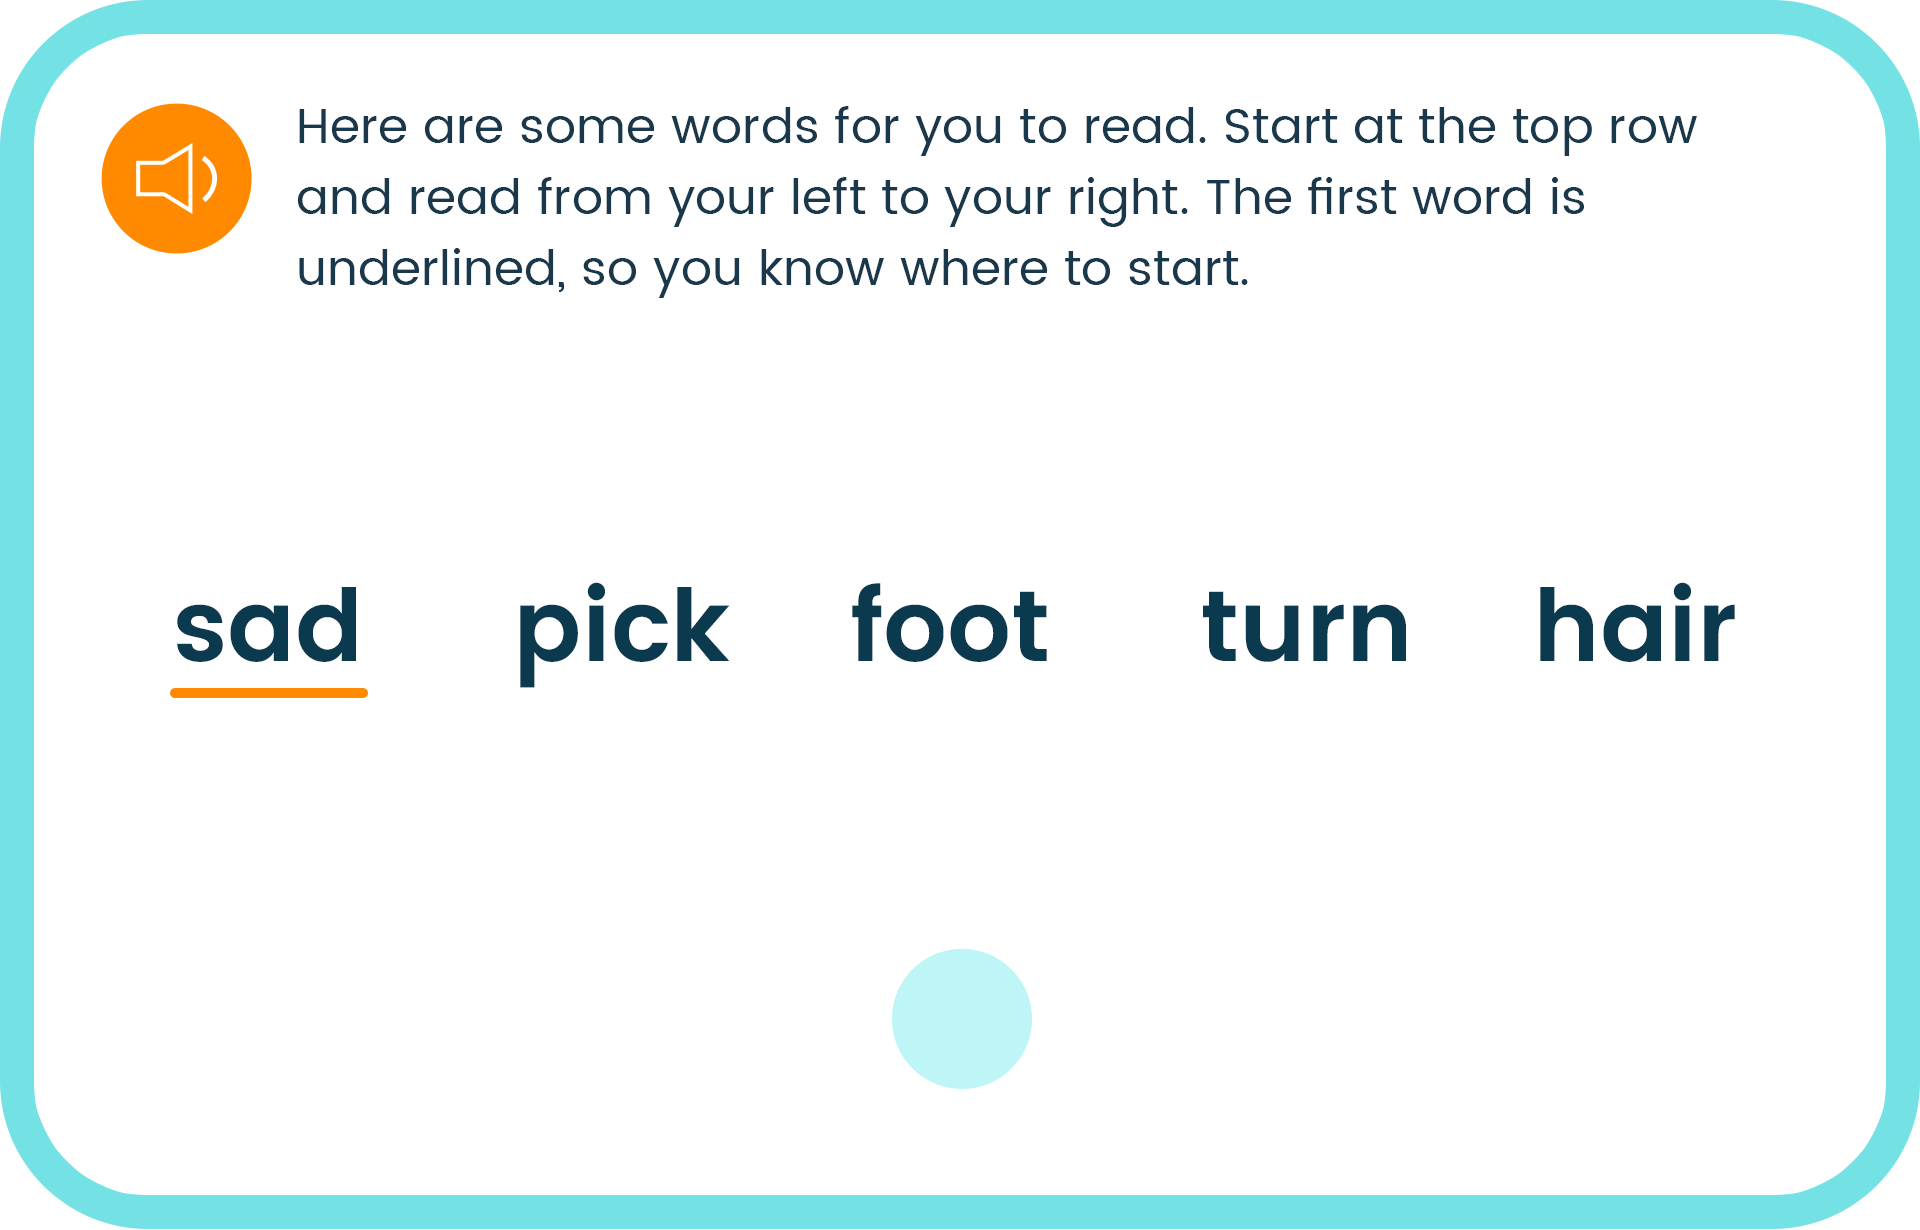 An example of a voice-enabled sight reading and word fluency exercise.